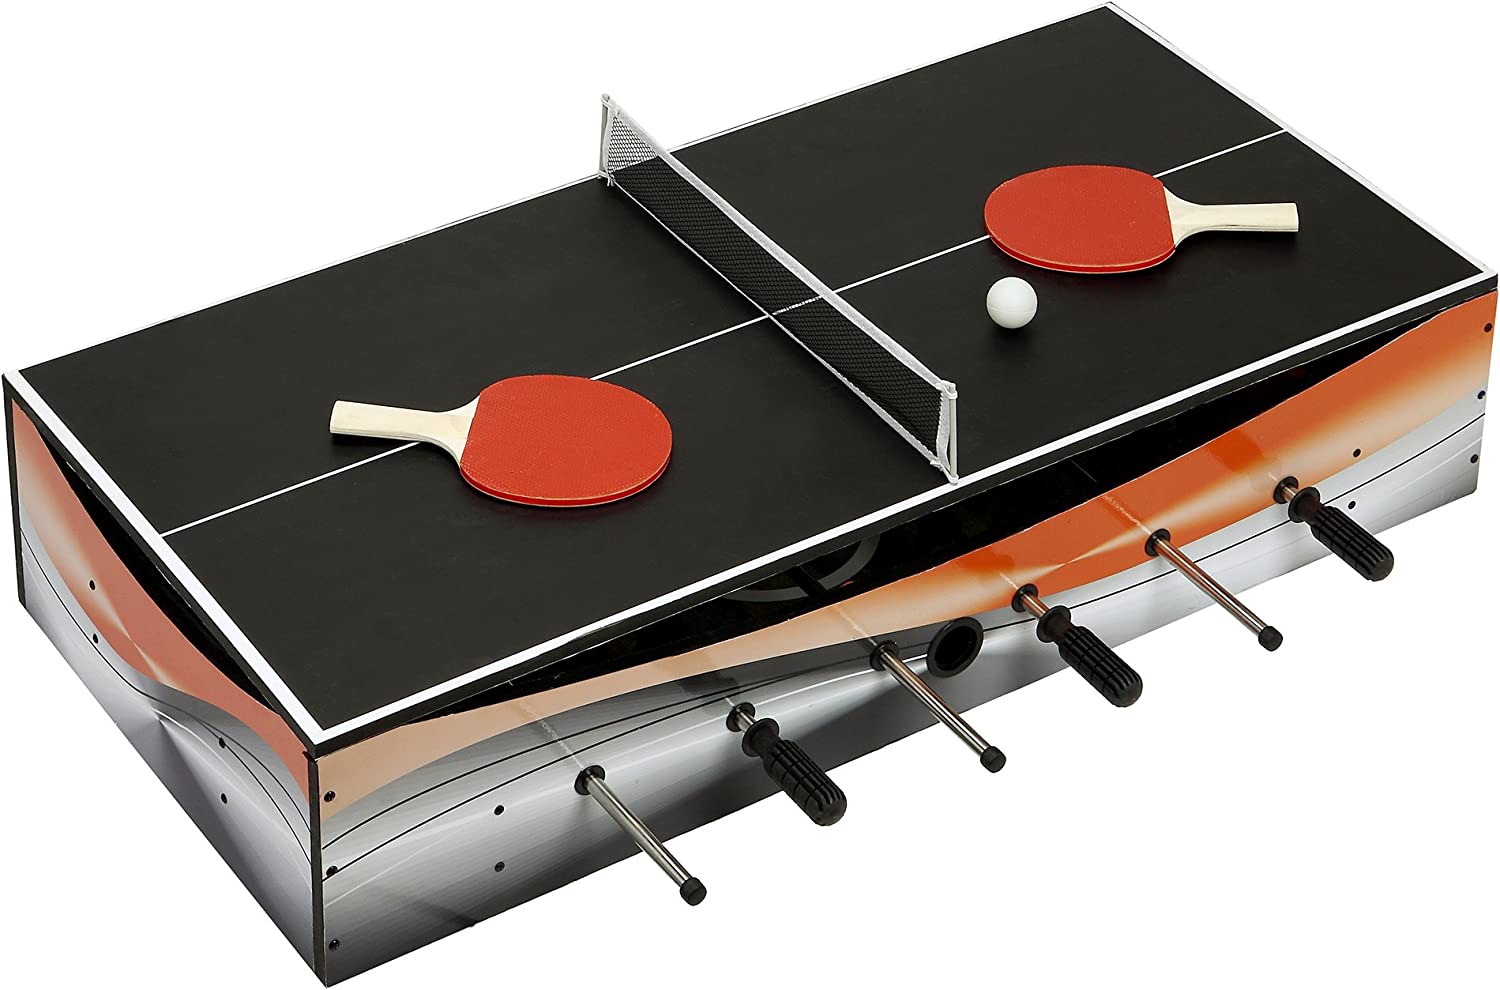 Hathaway Revolver 40-in 4-1 Tabletop Multi-Game with Foosball, Table Tennis, Glide Hockey, and Finger Football (BG1143M)